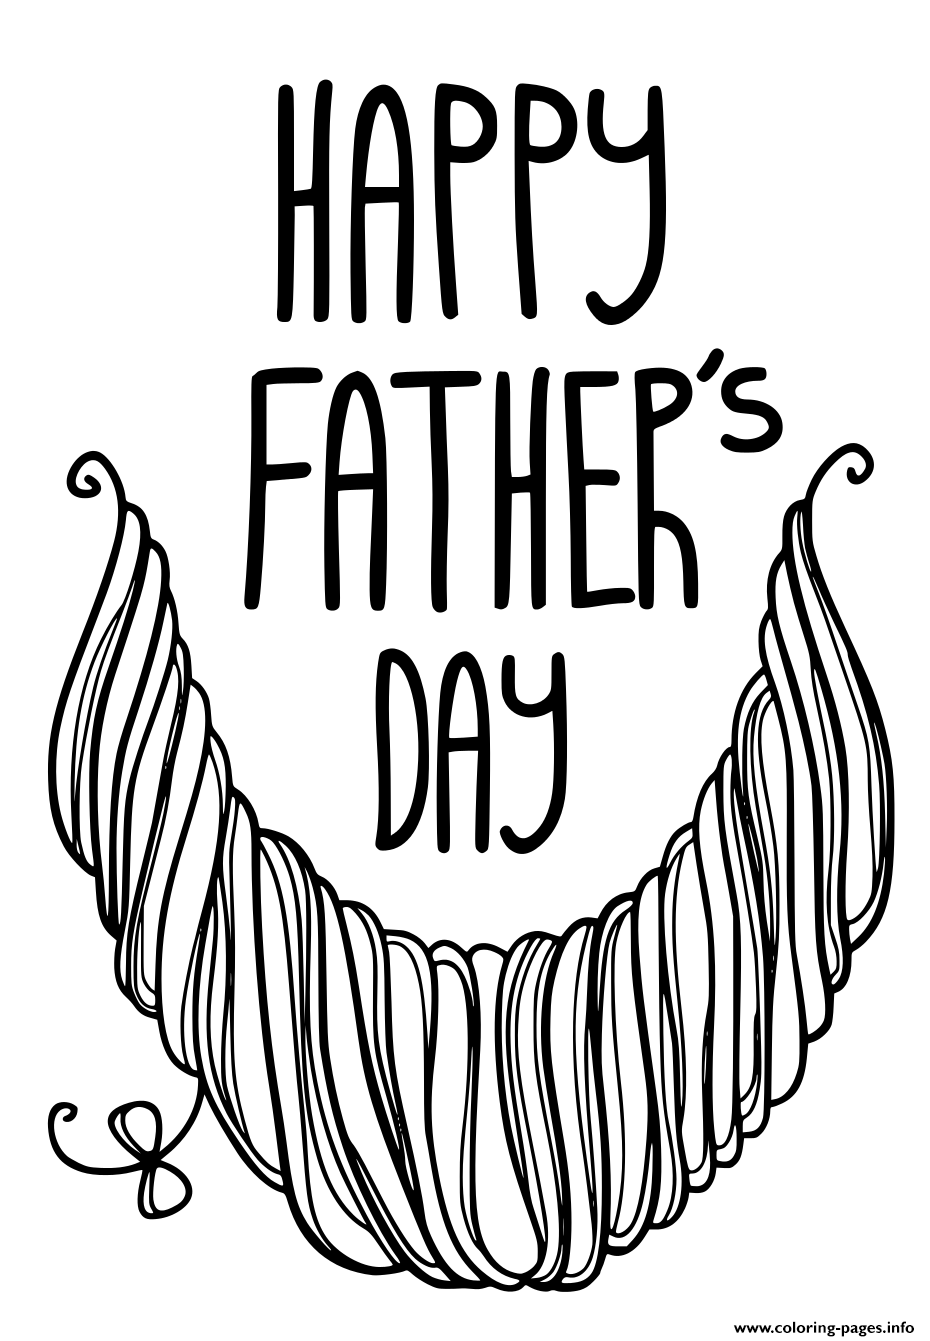 Happy Fathers Day Hipster Beard coloring